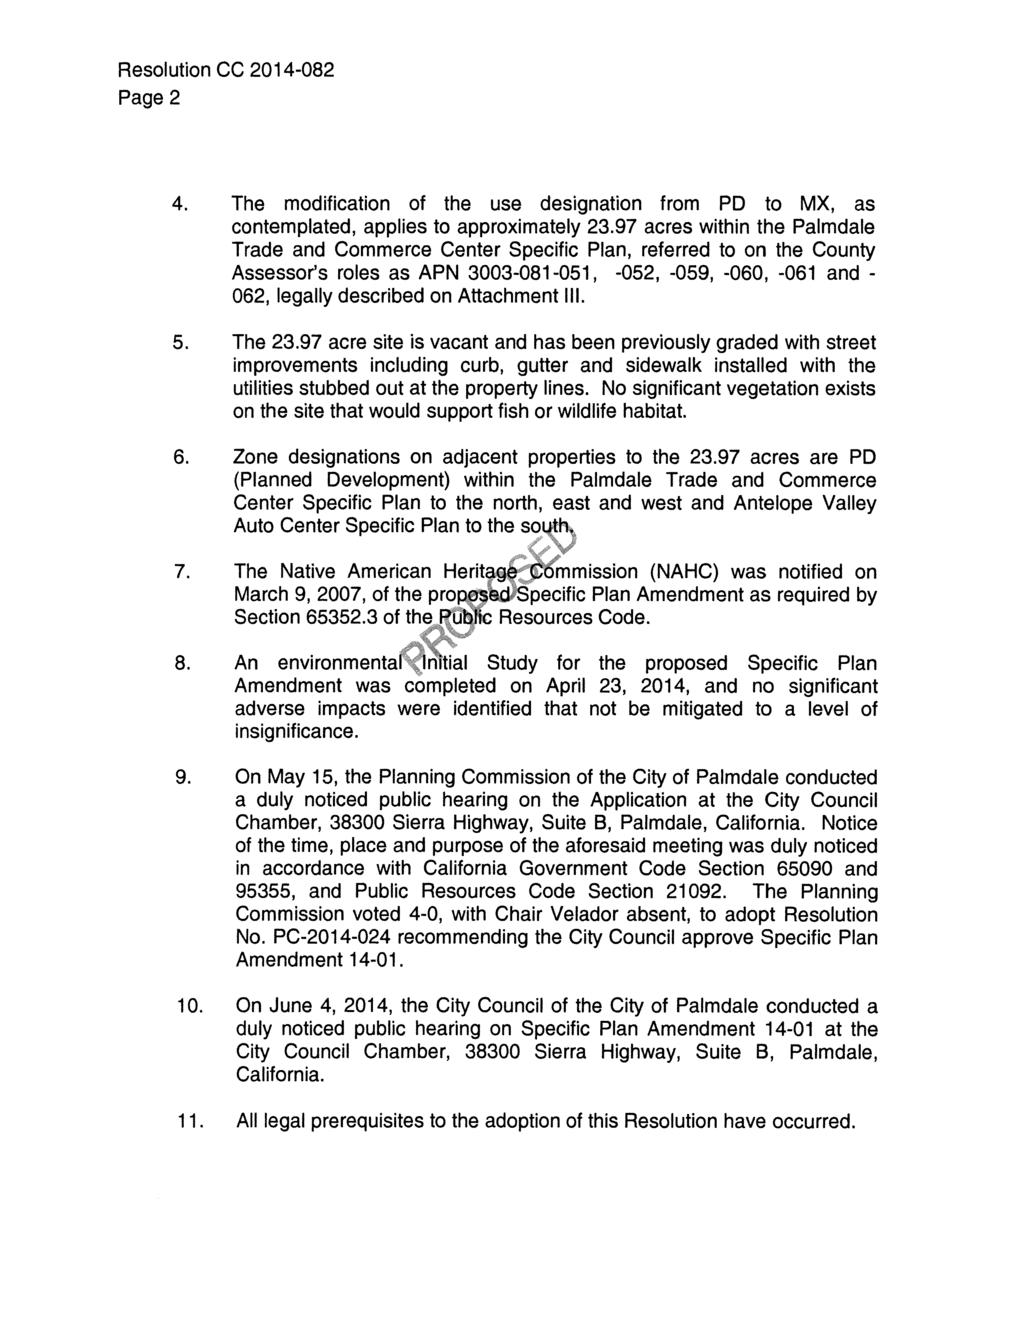 Resolution CC 2014-082 Page 2 4. The modification of the use designation from PD to MX, as contemplated, applies to approximately 23.